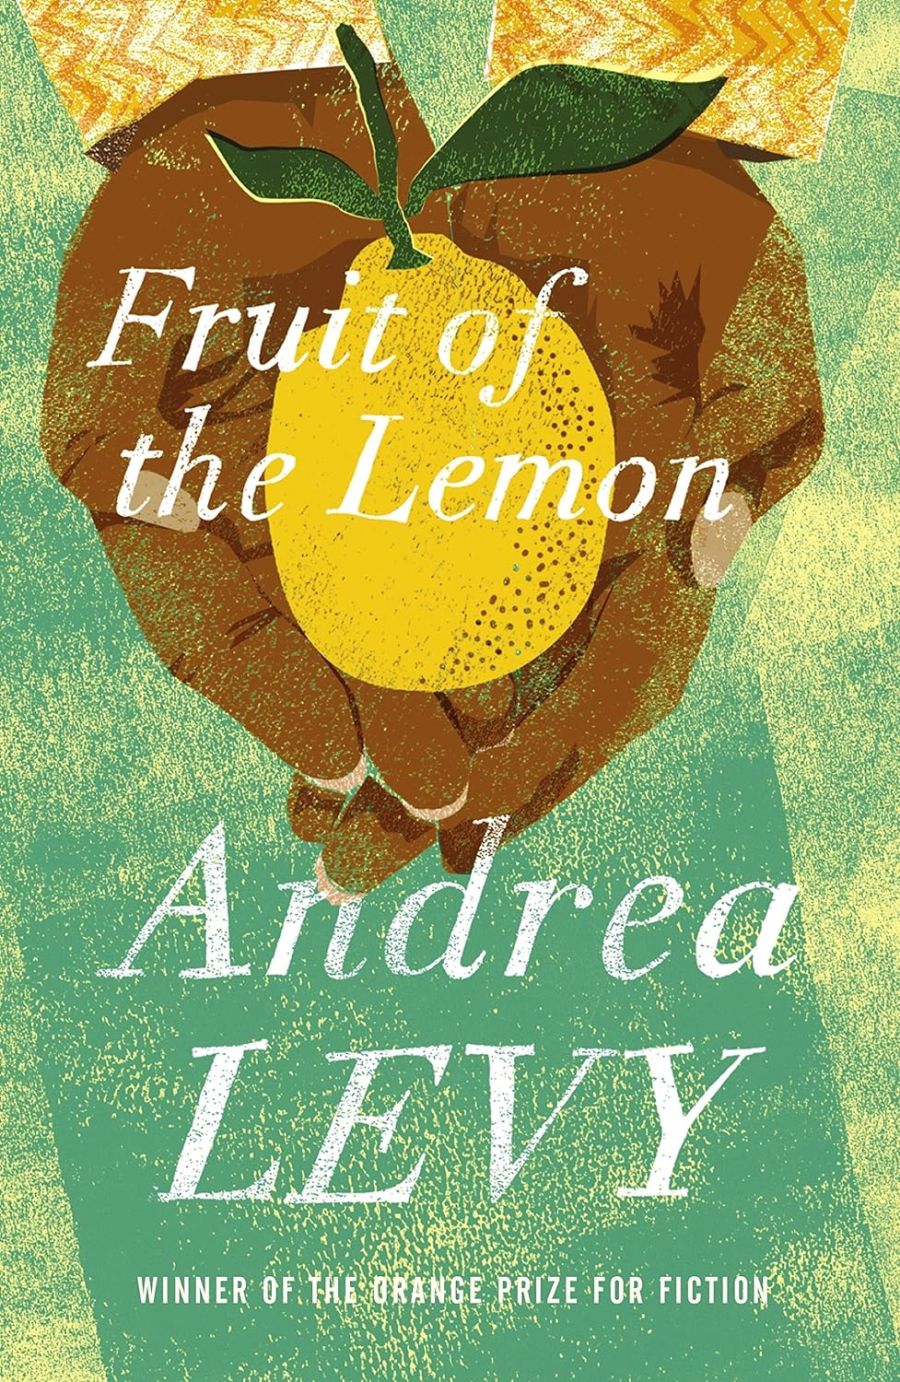 book cover with illustration of hands holding a lemon.